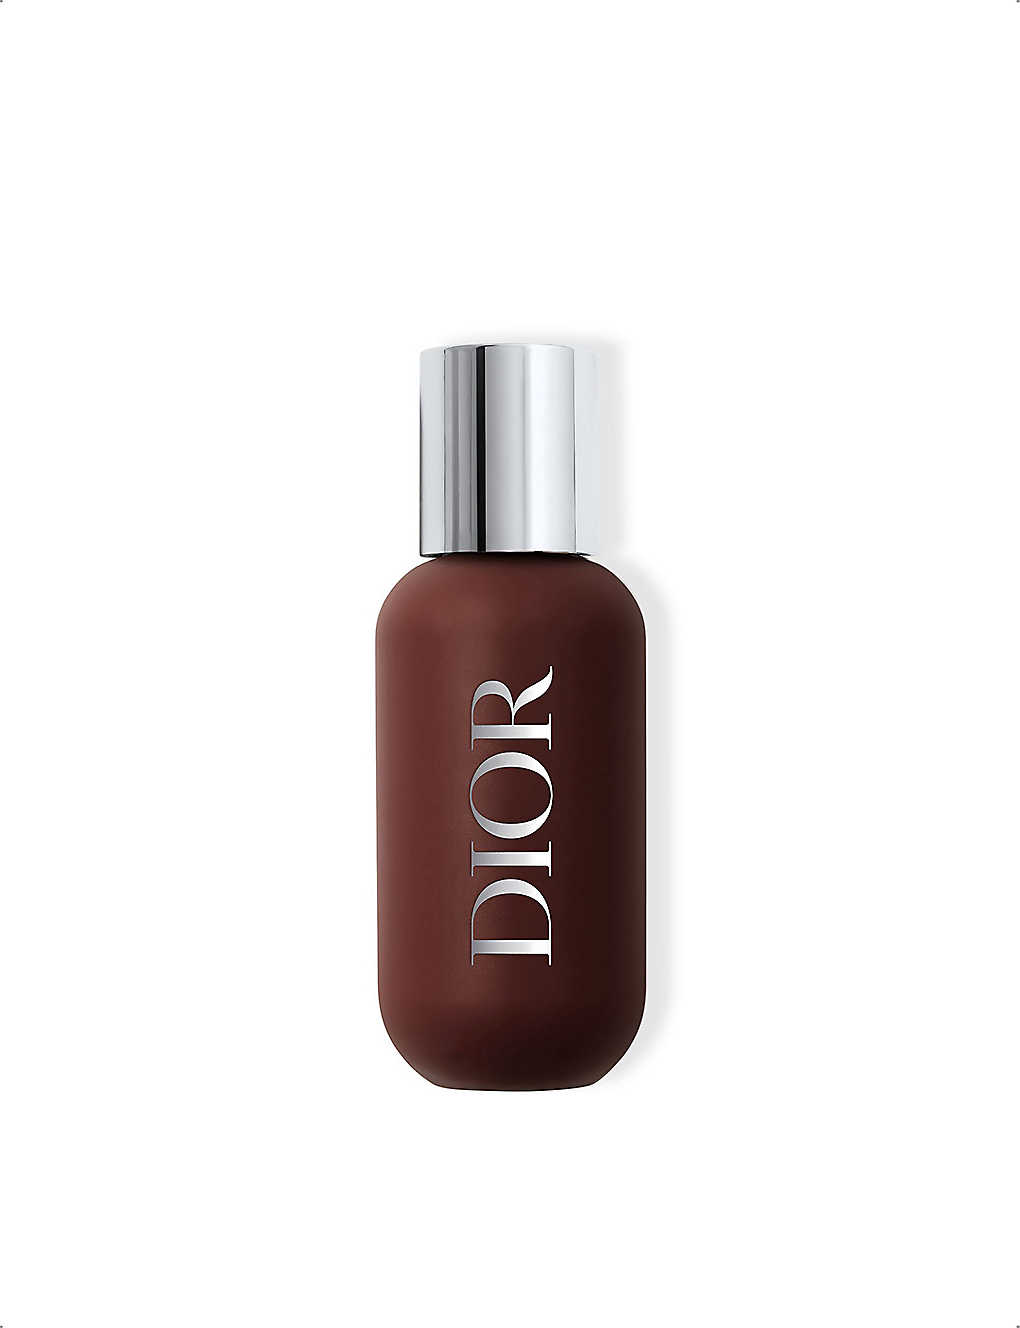 Dior Backstage Face & Body Foundation 50ml In 10n